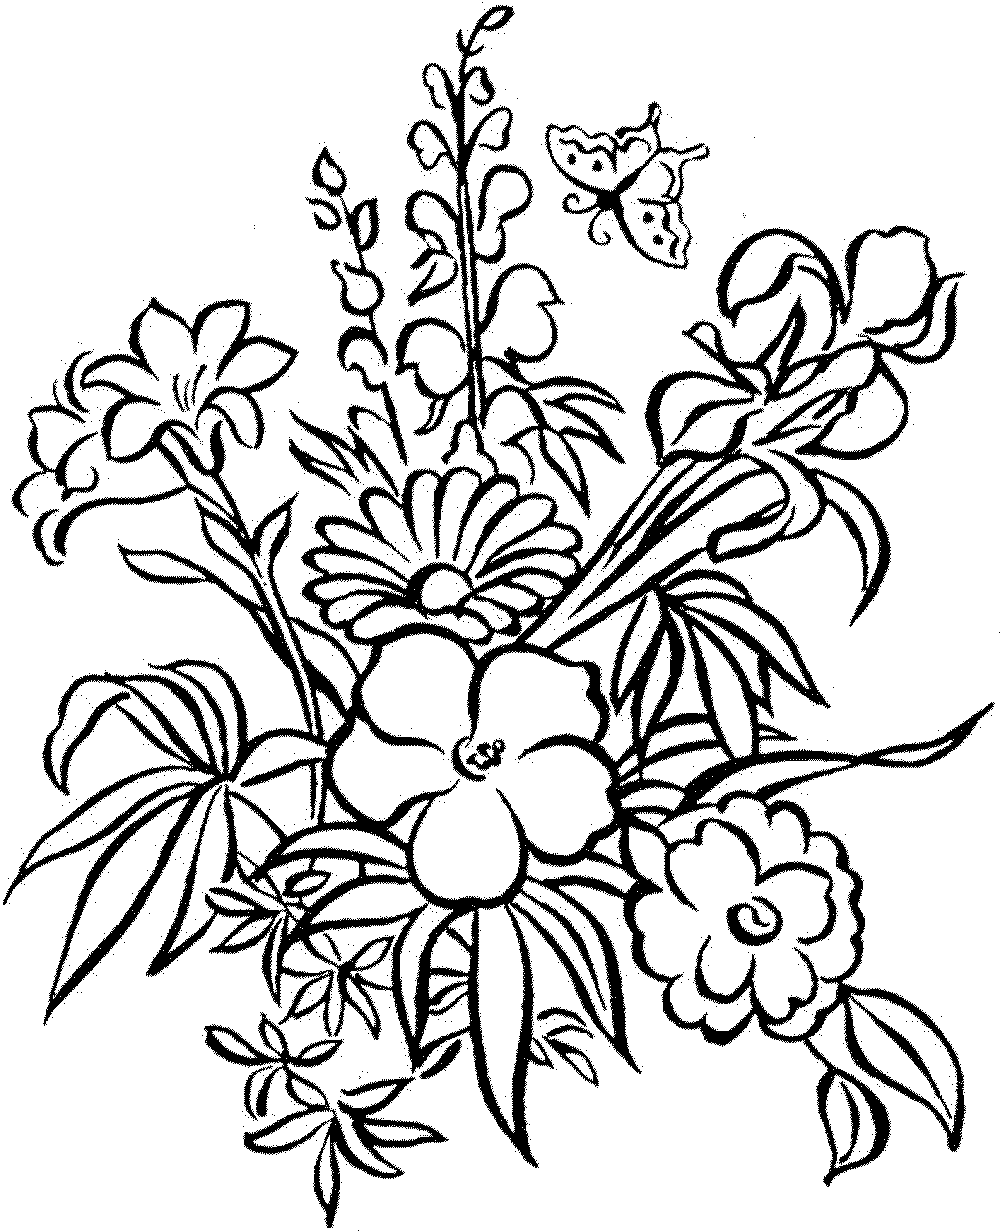 362 Cartoon Cute Flowers Coloring Pages for Adult